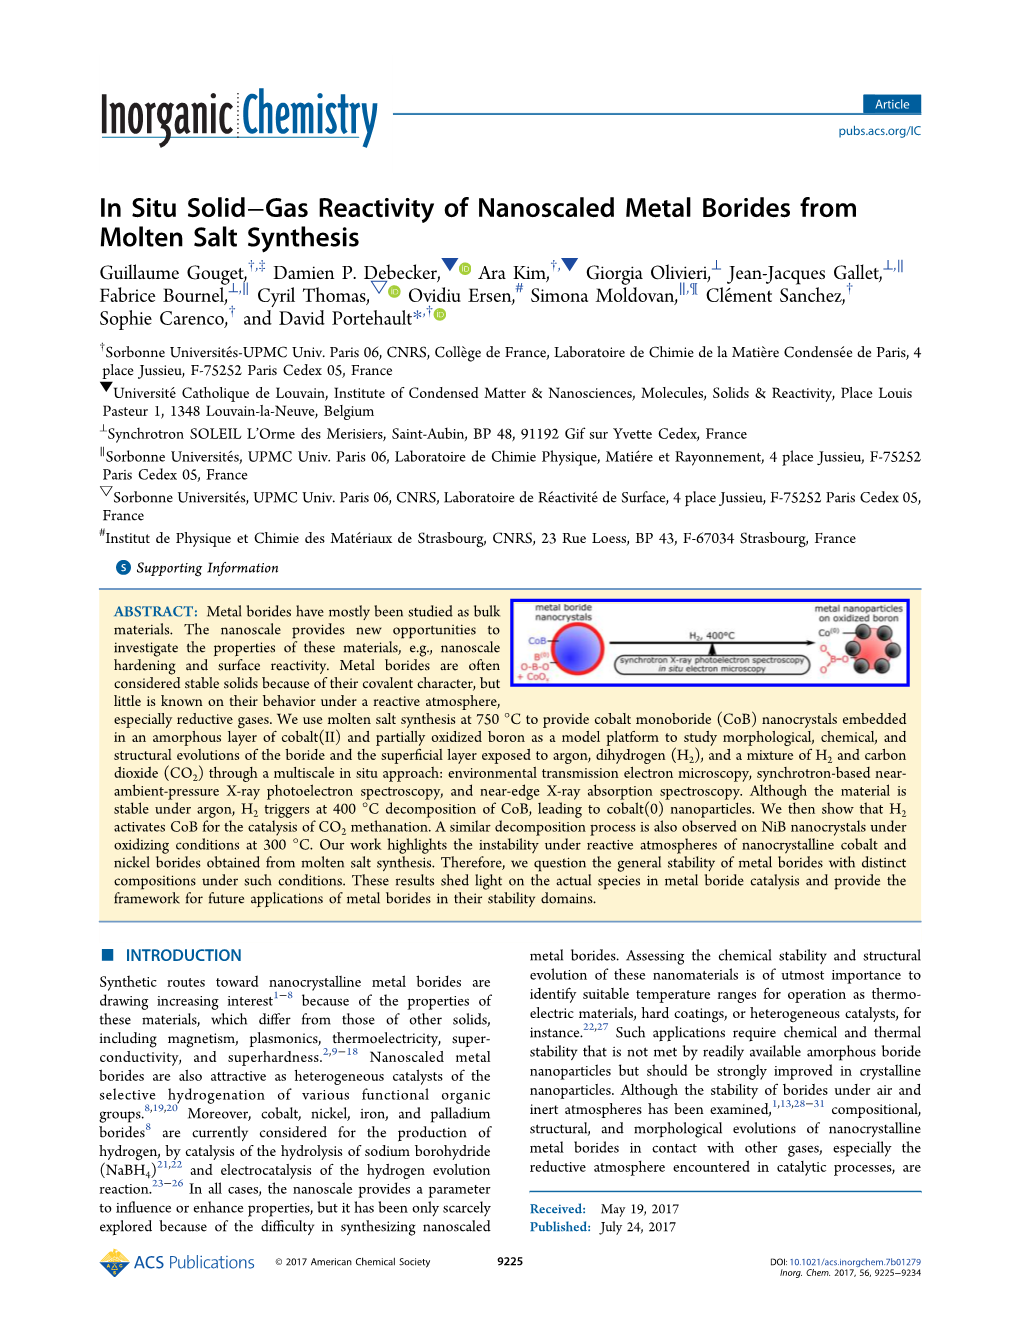 In Situ Solid–Gas Reactivity of Nanoscaled Metal Borides from Molten Salt Synthesis